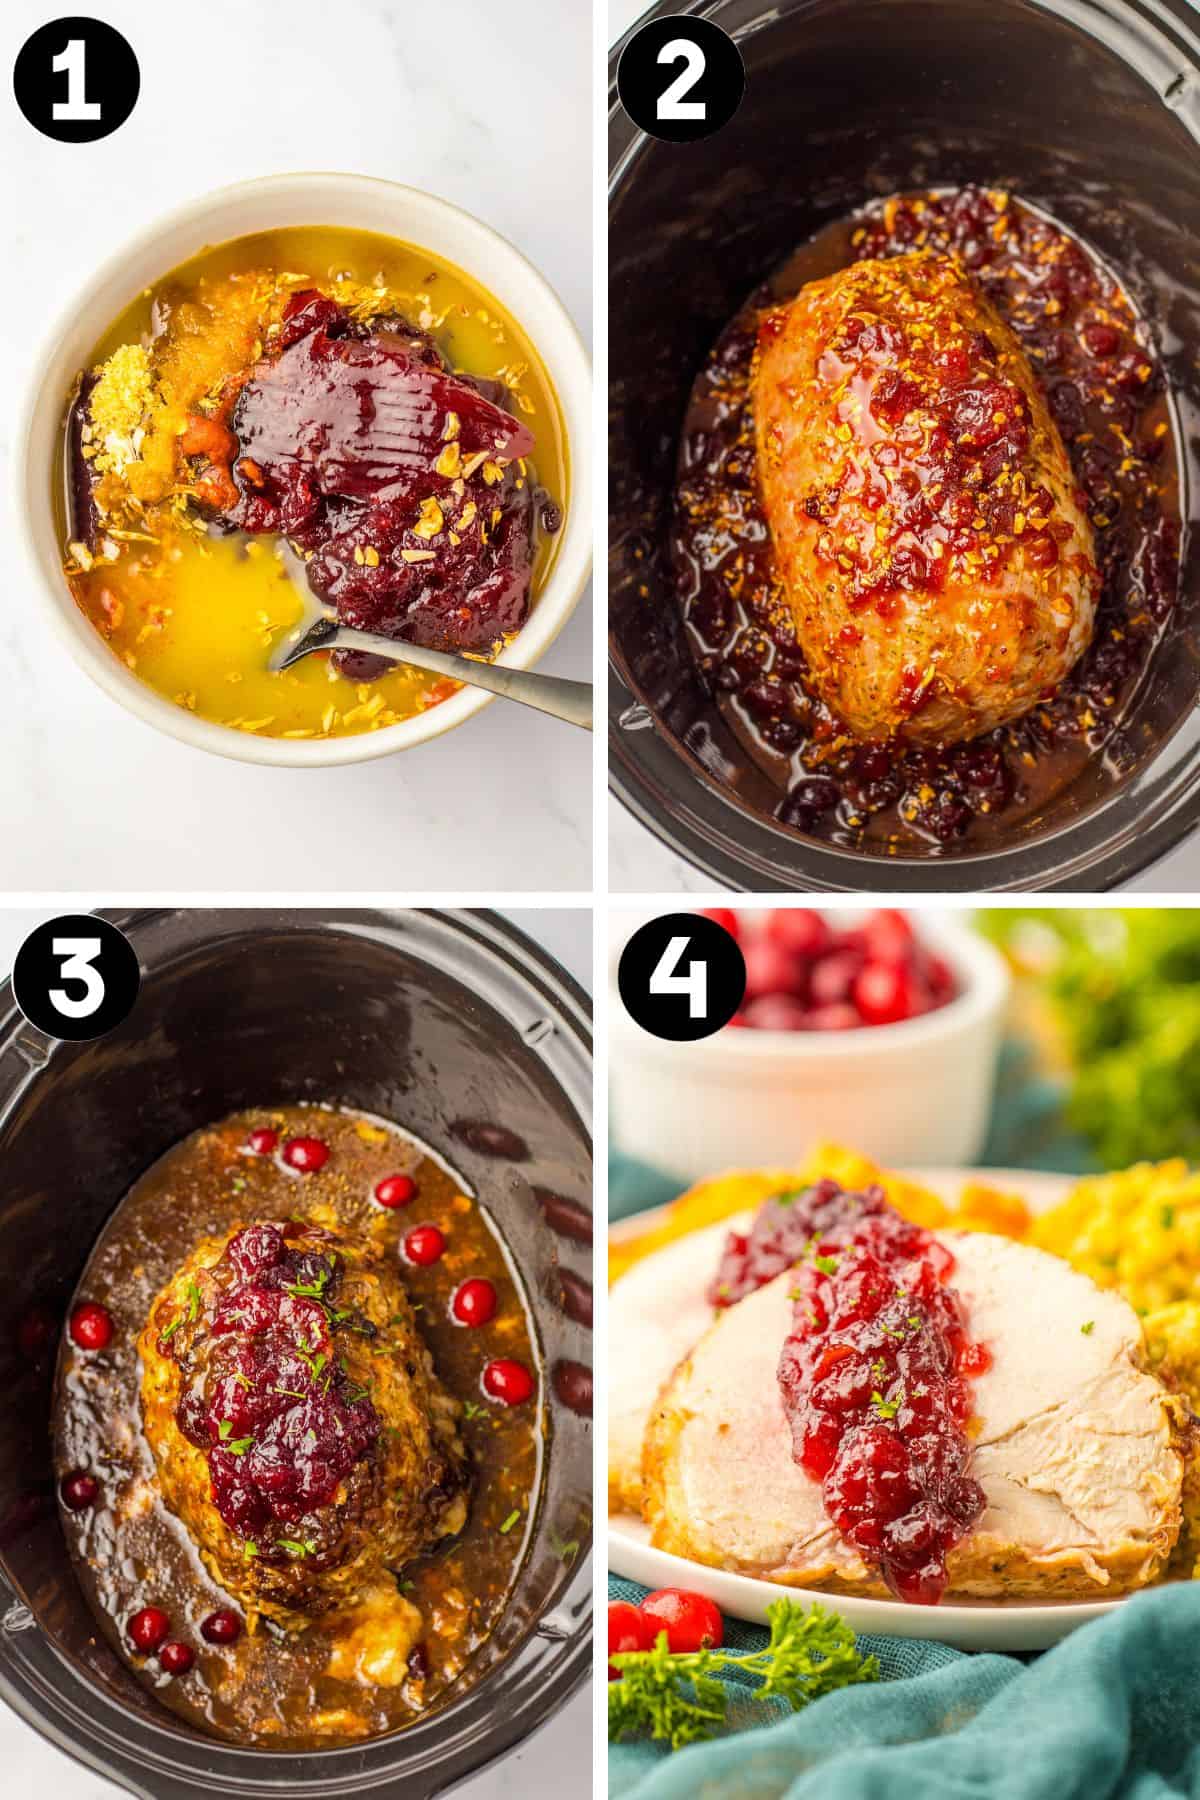 Four image collage: 1) cranberry sauce mixture in mixing bowl with spoon, 2) sauce poured over turkey roast in crock pot, 3) roast after slow cooking, and 4) slow cooked turkey sliced and served topped with sauce.